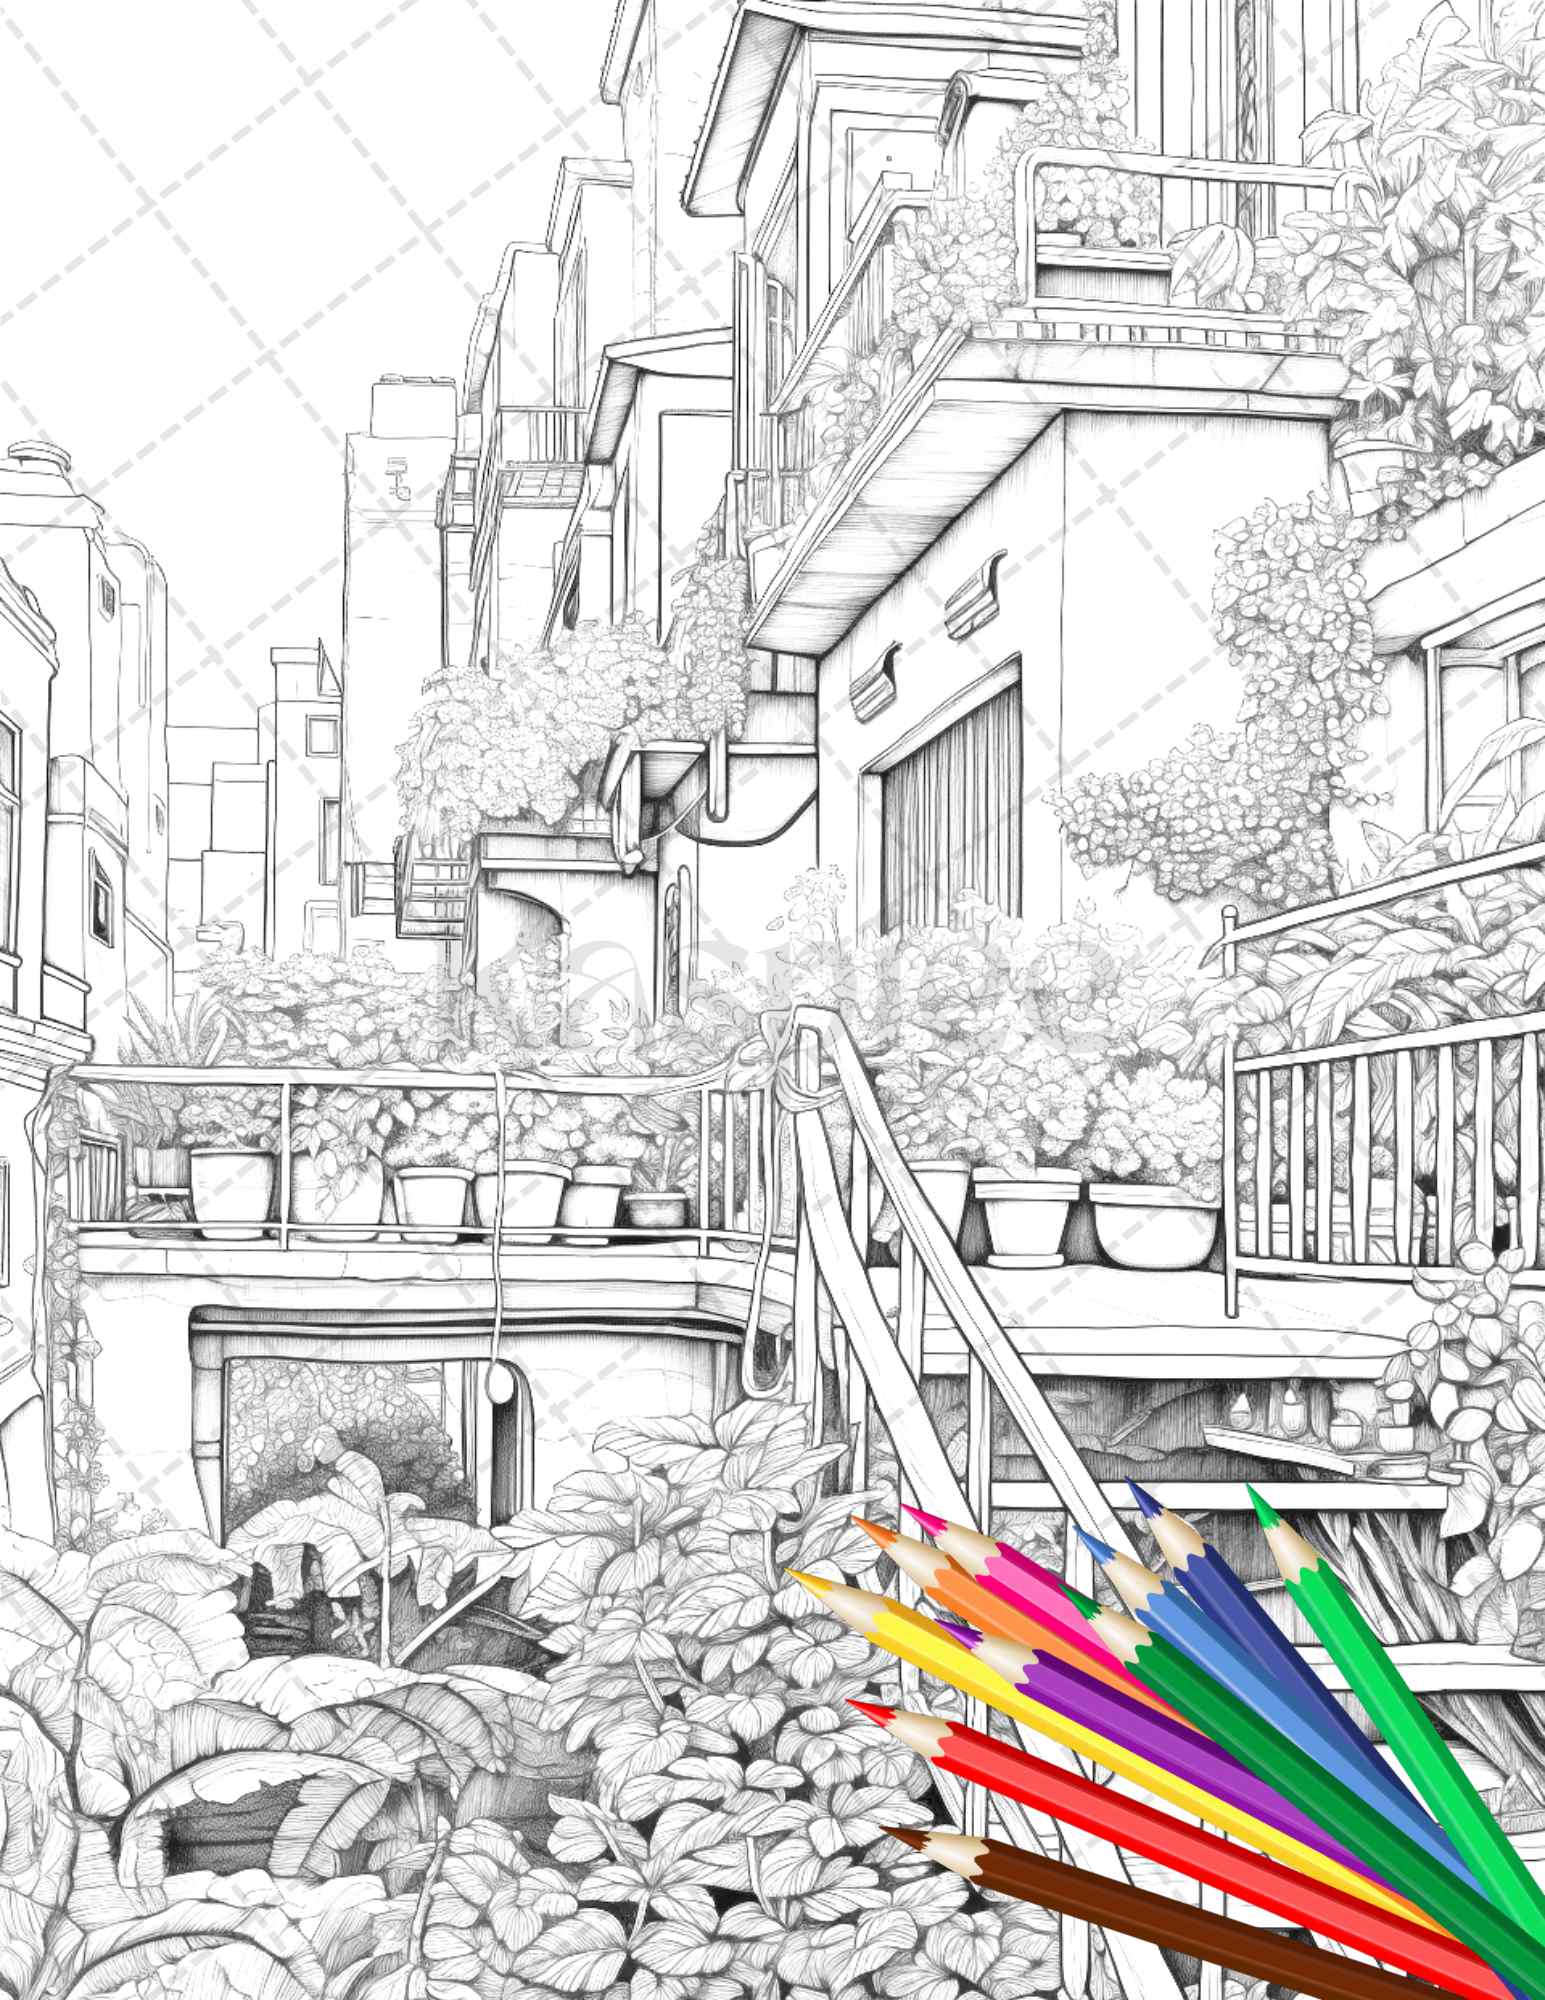 Charming Balcony Garden Grayscale Coloring Pages Printable for Adults, PDF File Instant Download - raspiee